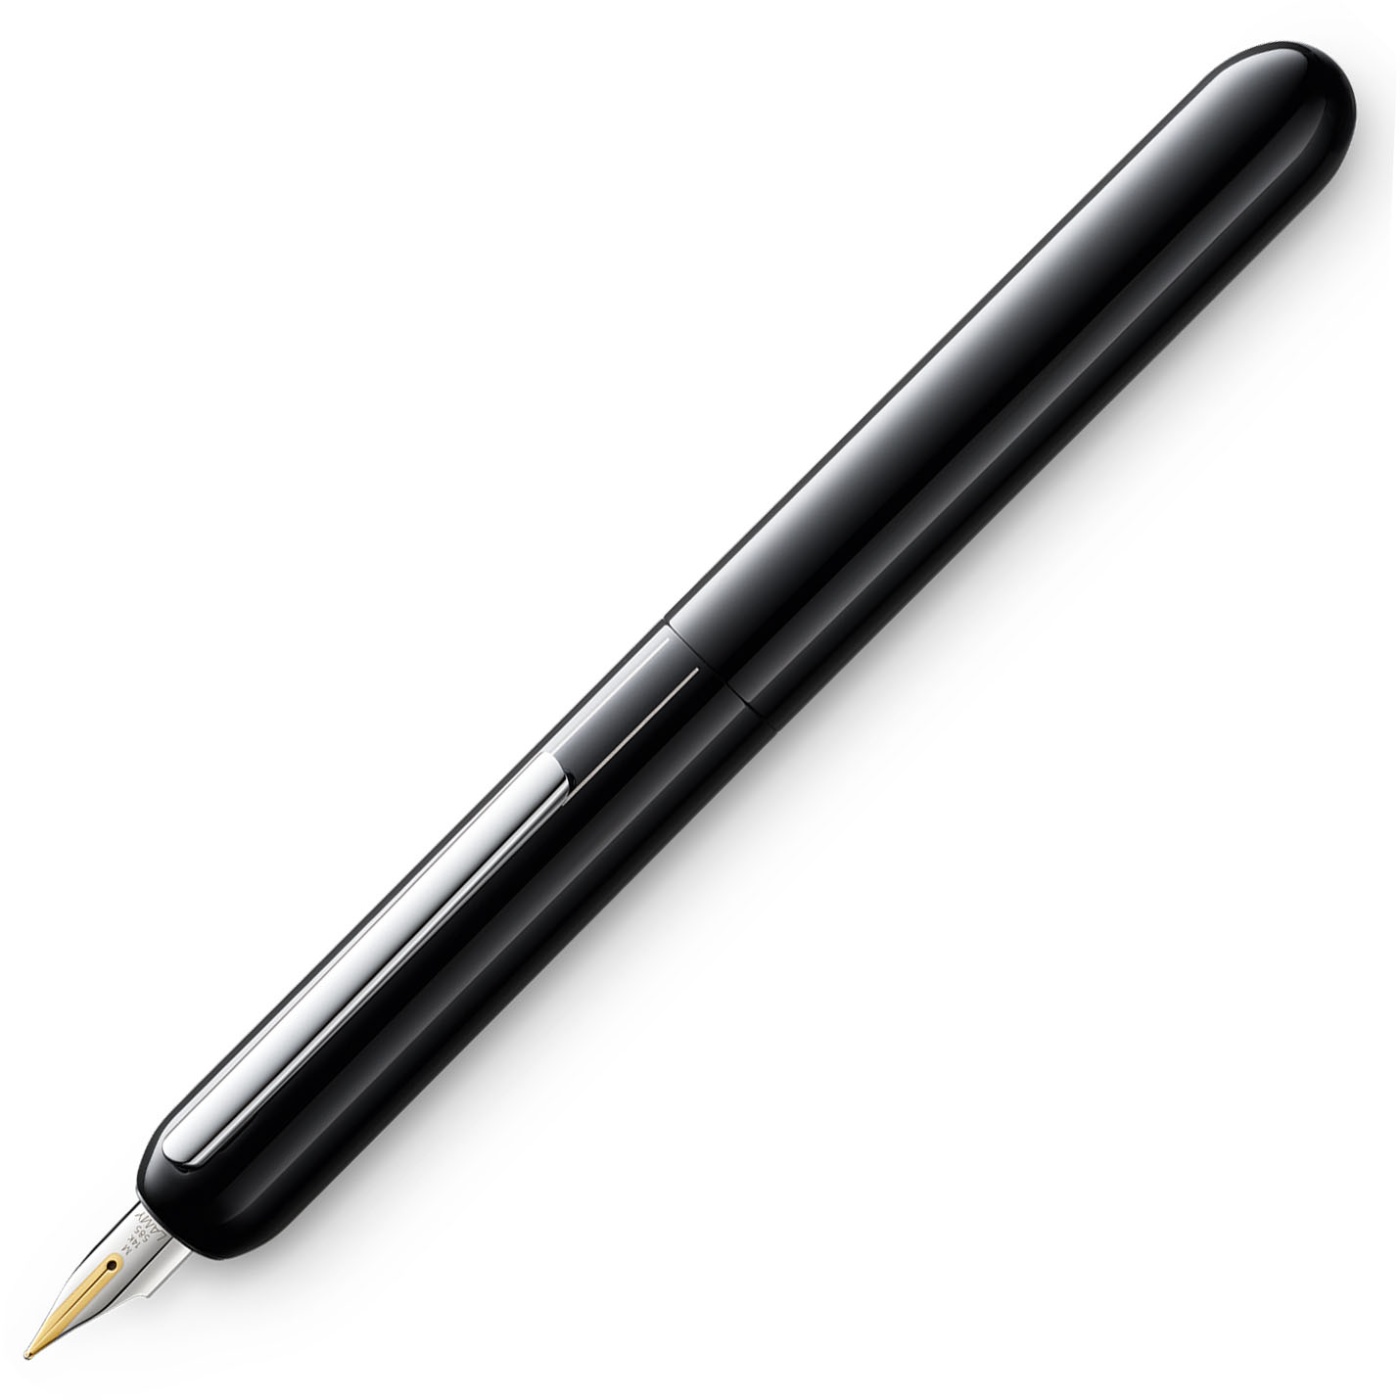 Dialog 3 Piano Black Fountain pen in the group Pens / Fine Writing / Gift Pens at Pen Store (102109_r)